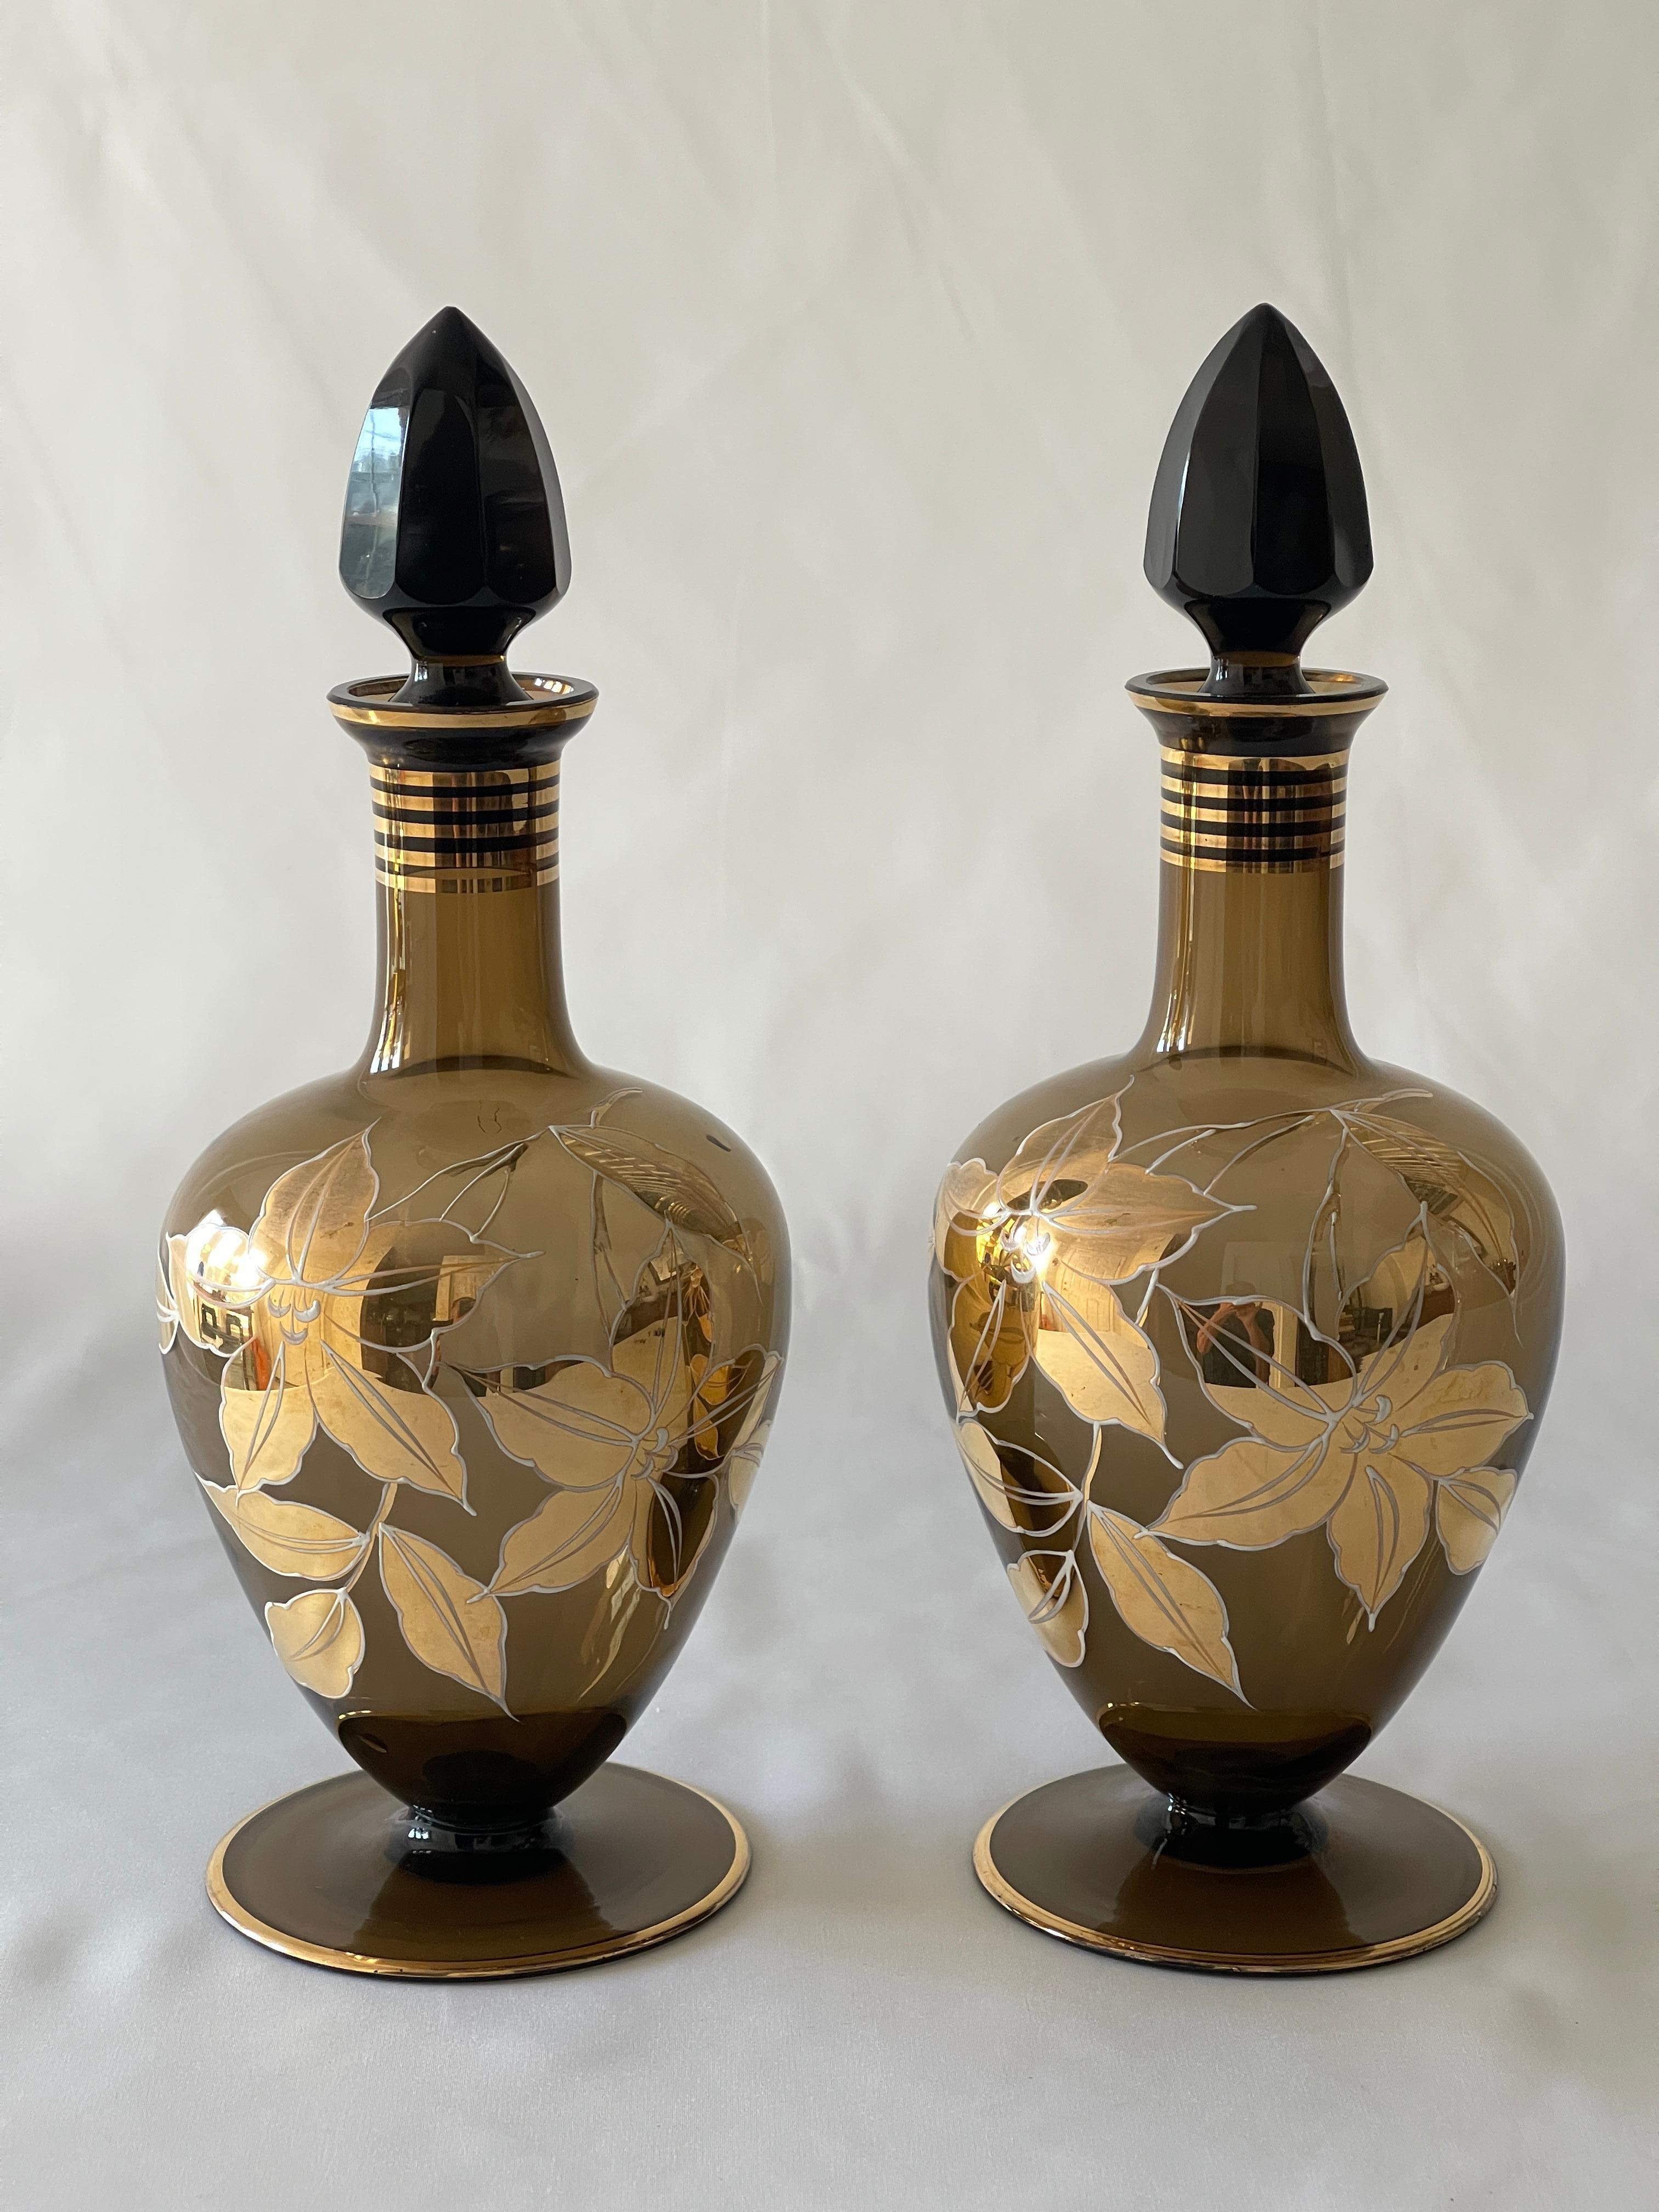 Lustrous German Mid Century smoke glass decanter set , finely hand decorated with 22K gold and enamel. Set includes two decanters with faceted dark smoke glass stoppers and a covered glass dish. 
The set is in excellent condition.